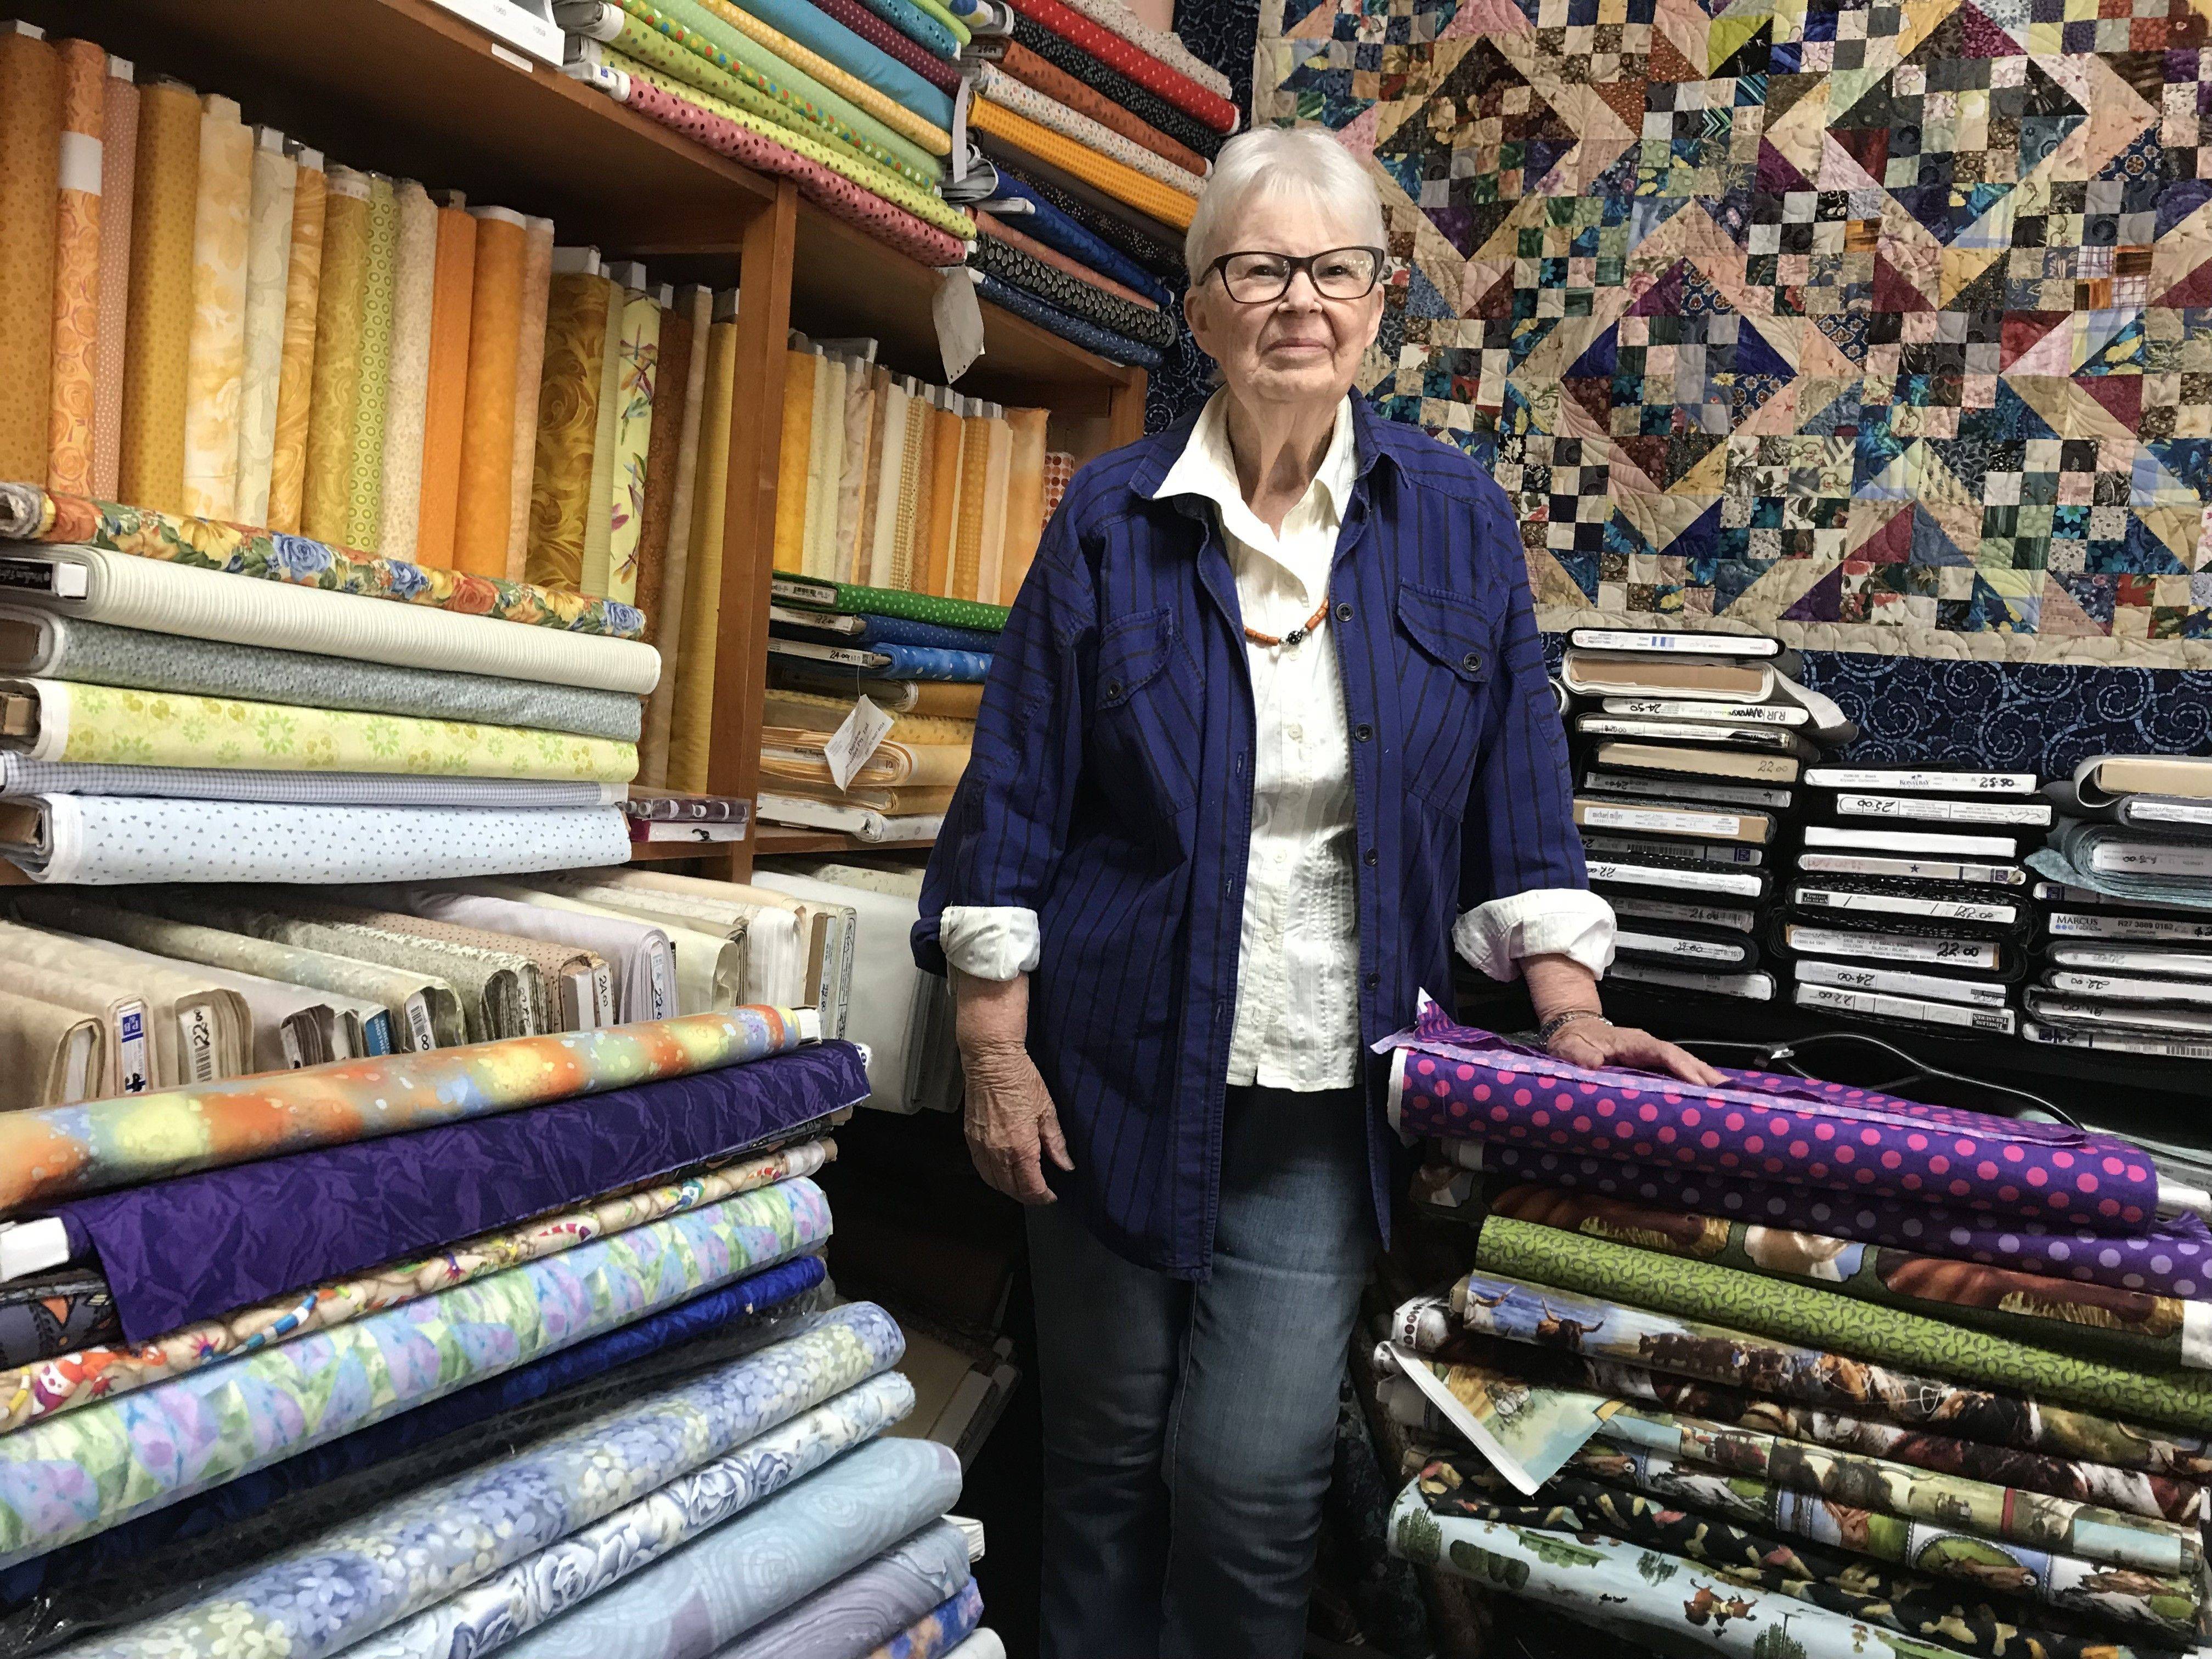 A stitch in time for Braidwood - 24th Annual Quilt Airing this weekend